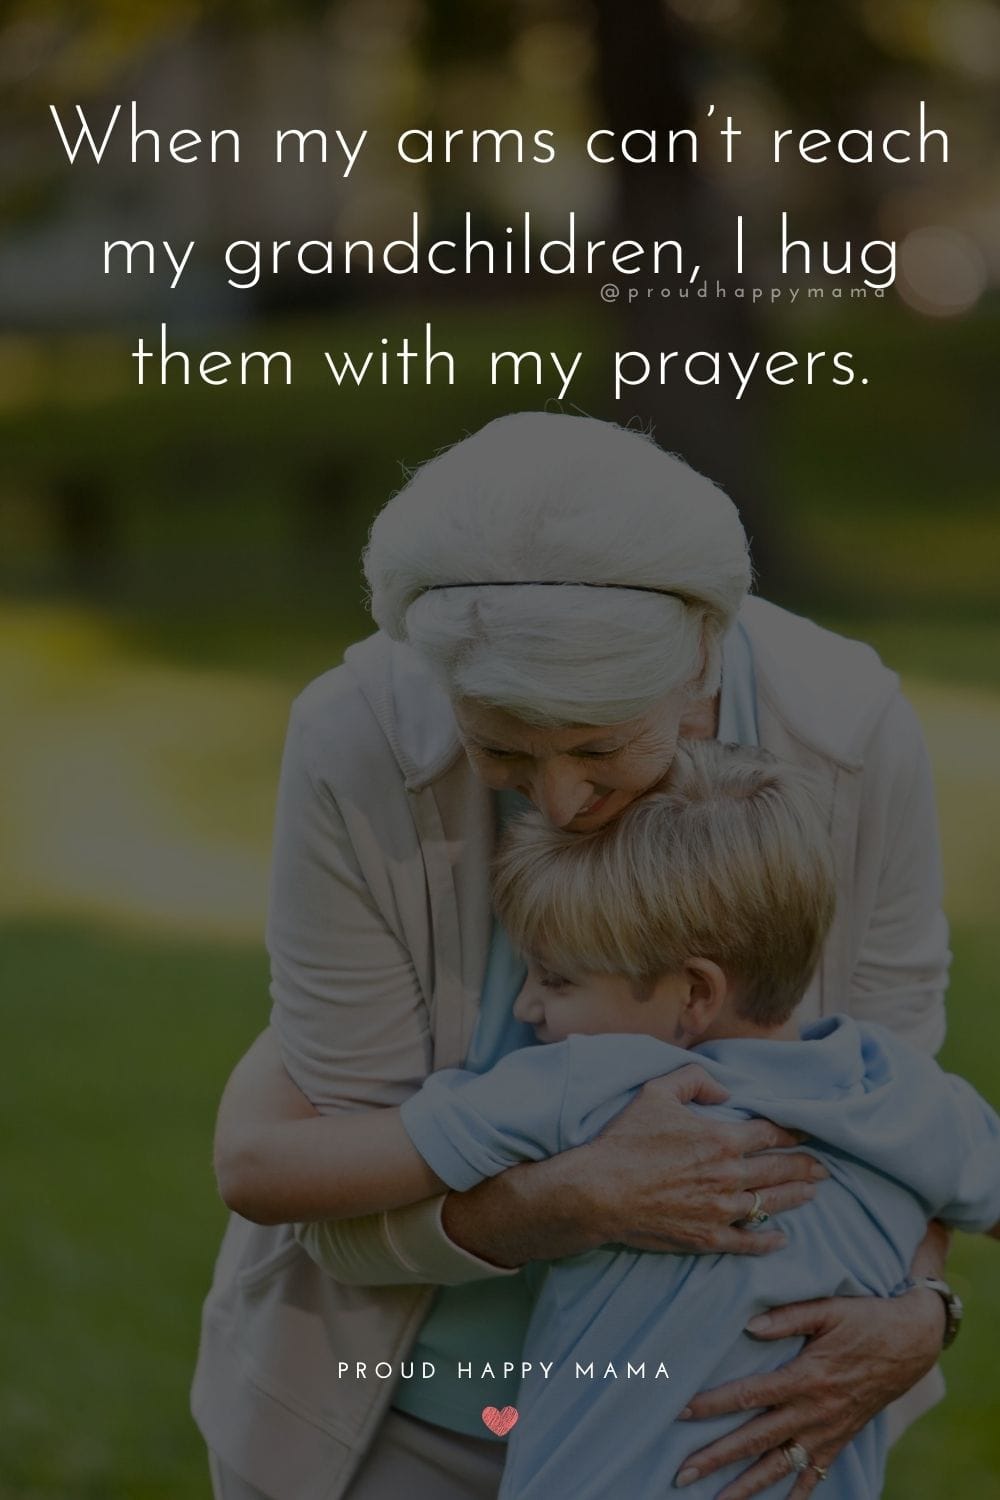 Grandparents Quotes For Grandchildren - When my arms can’t reach my grandchildren, I hug them with my prayers.